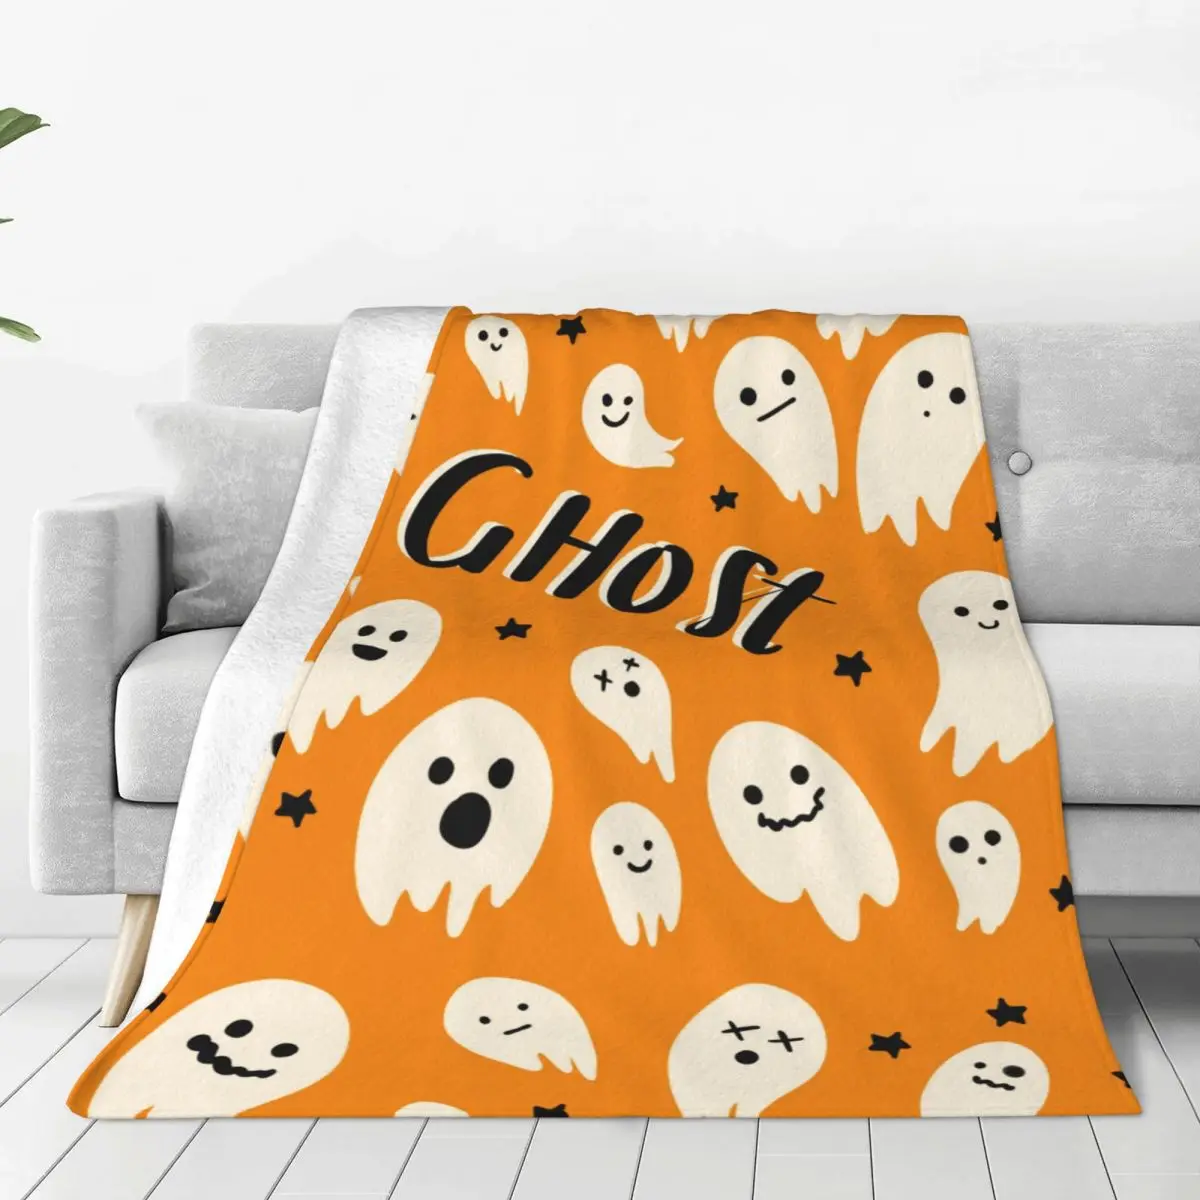 

Halloween Blanket Ultra Soft Cozy Blooming Flowers Decorative Flannel Blanket All Season For Home Couch Bed Chair Travel